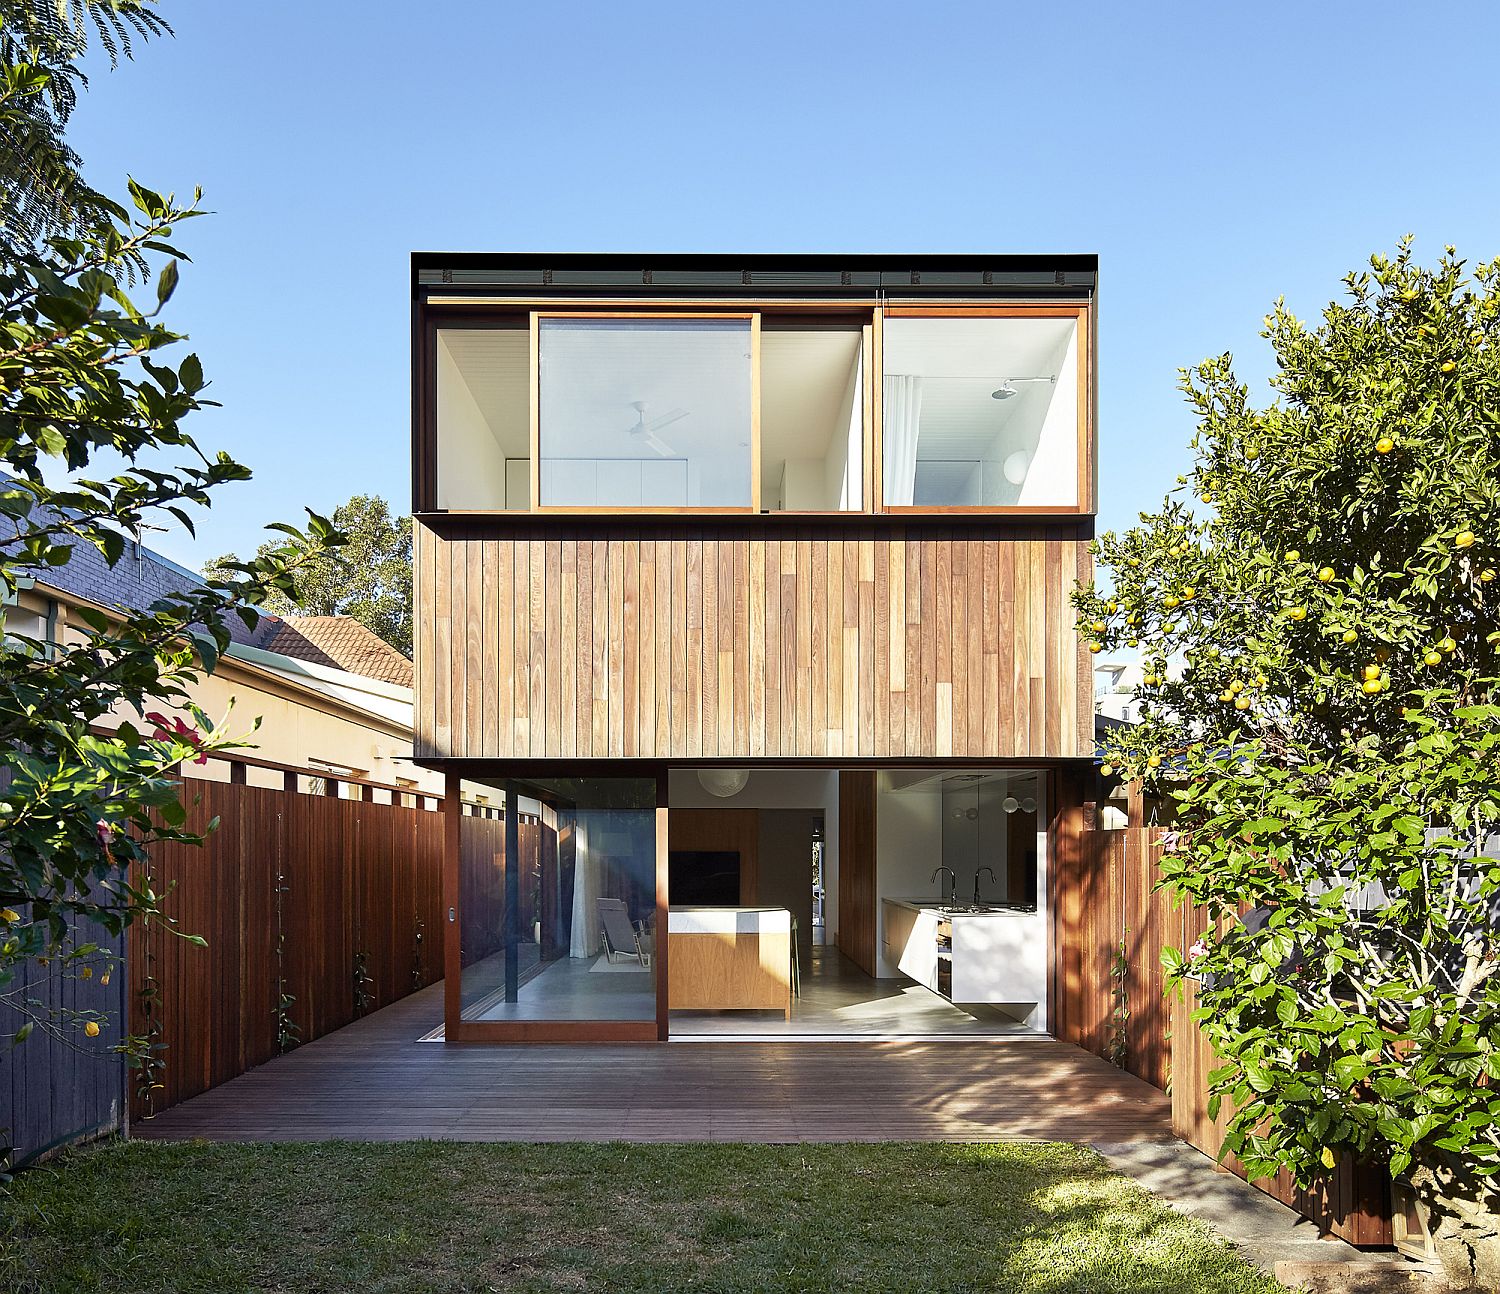 Box-Like Rear Extension in Wood Adds Functional Modernity to this Brick House